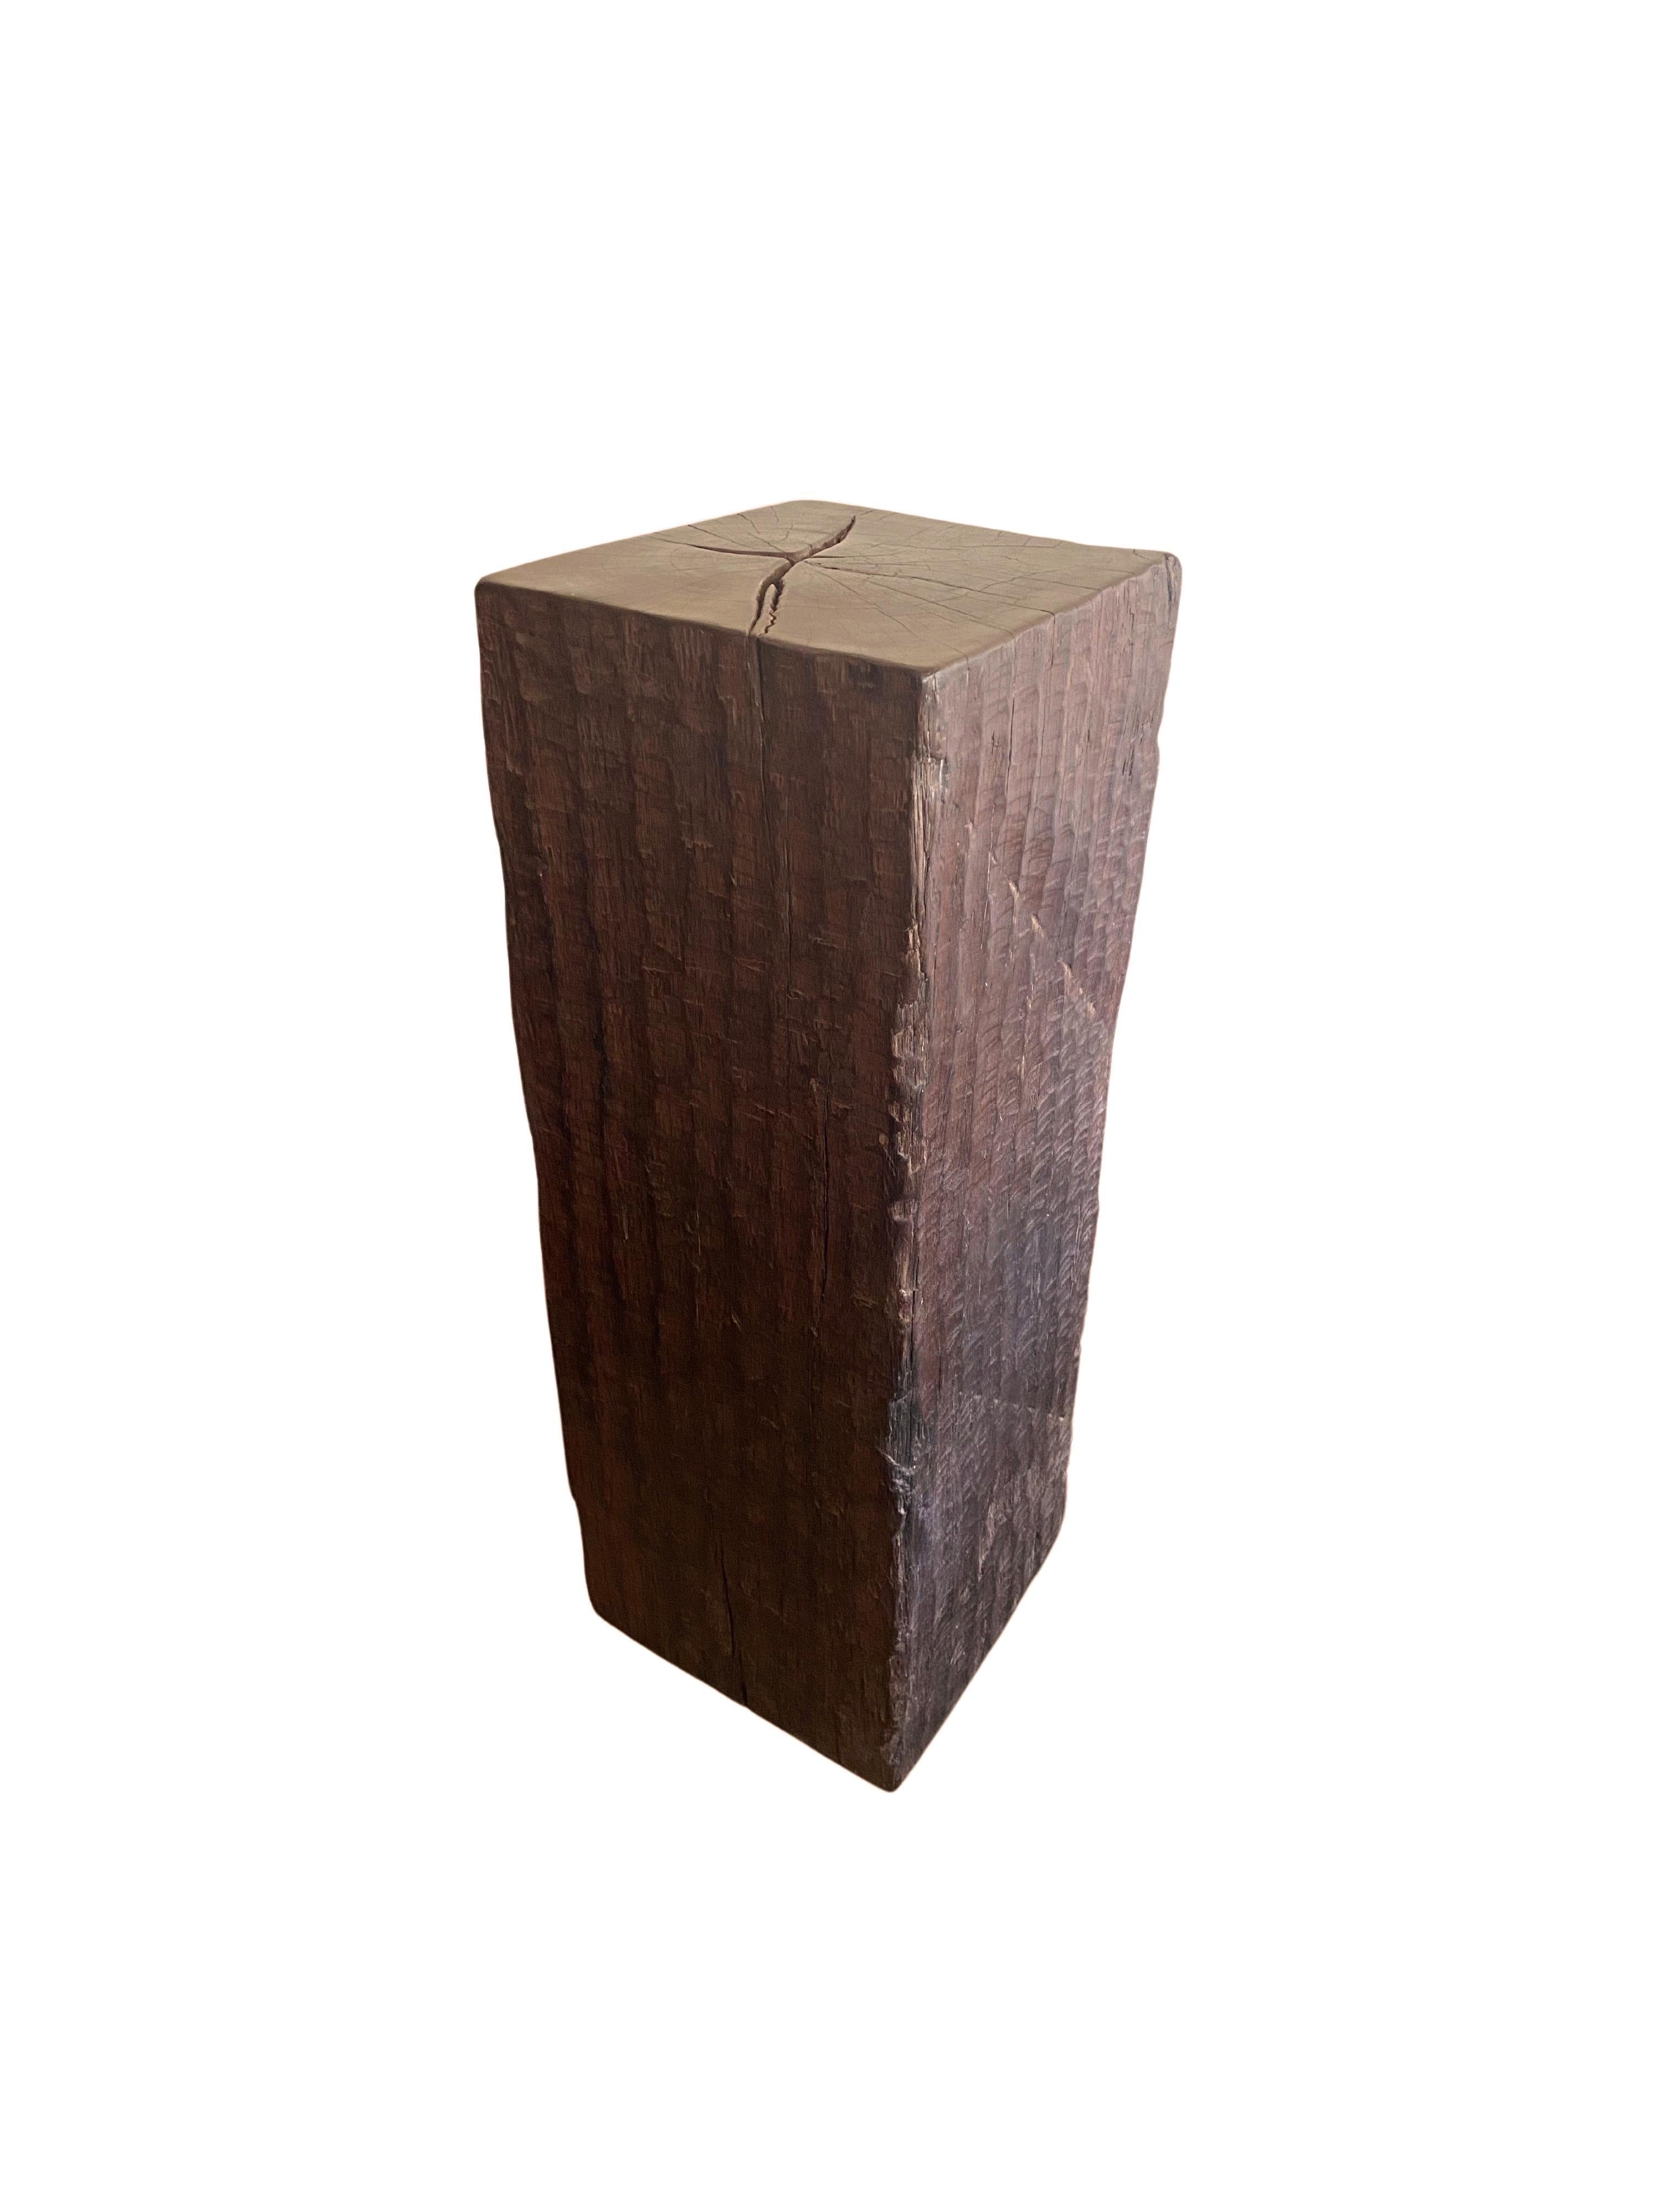 Organic Modern Solid Iron Wood Pedestal with Stunning Wood Texture For Sale